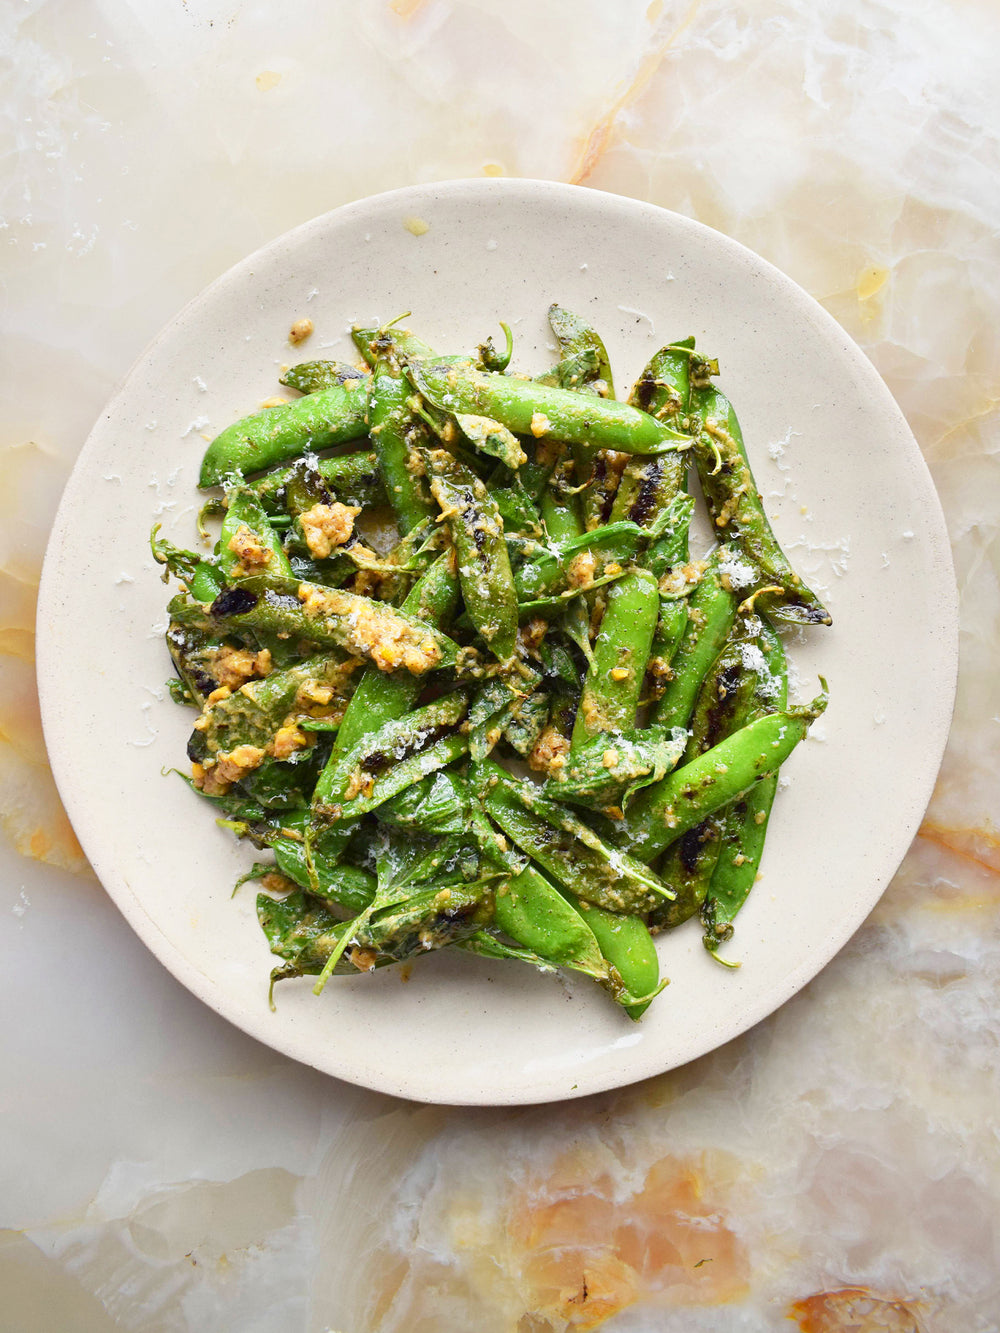 Charred peas with lemon and parmesan dressing